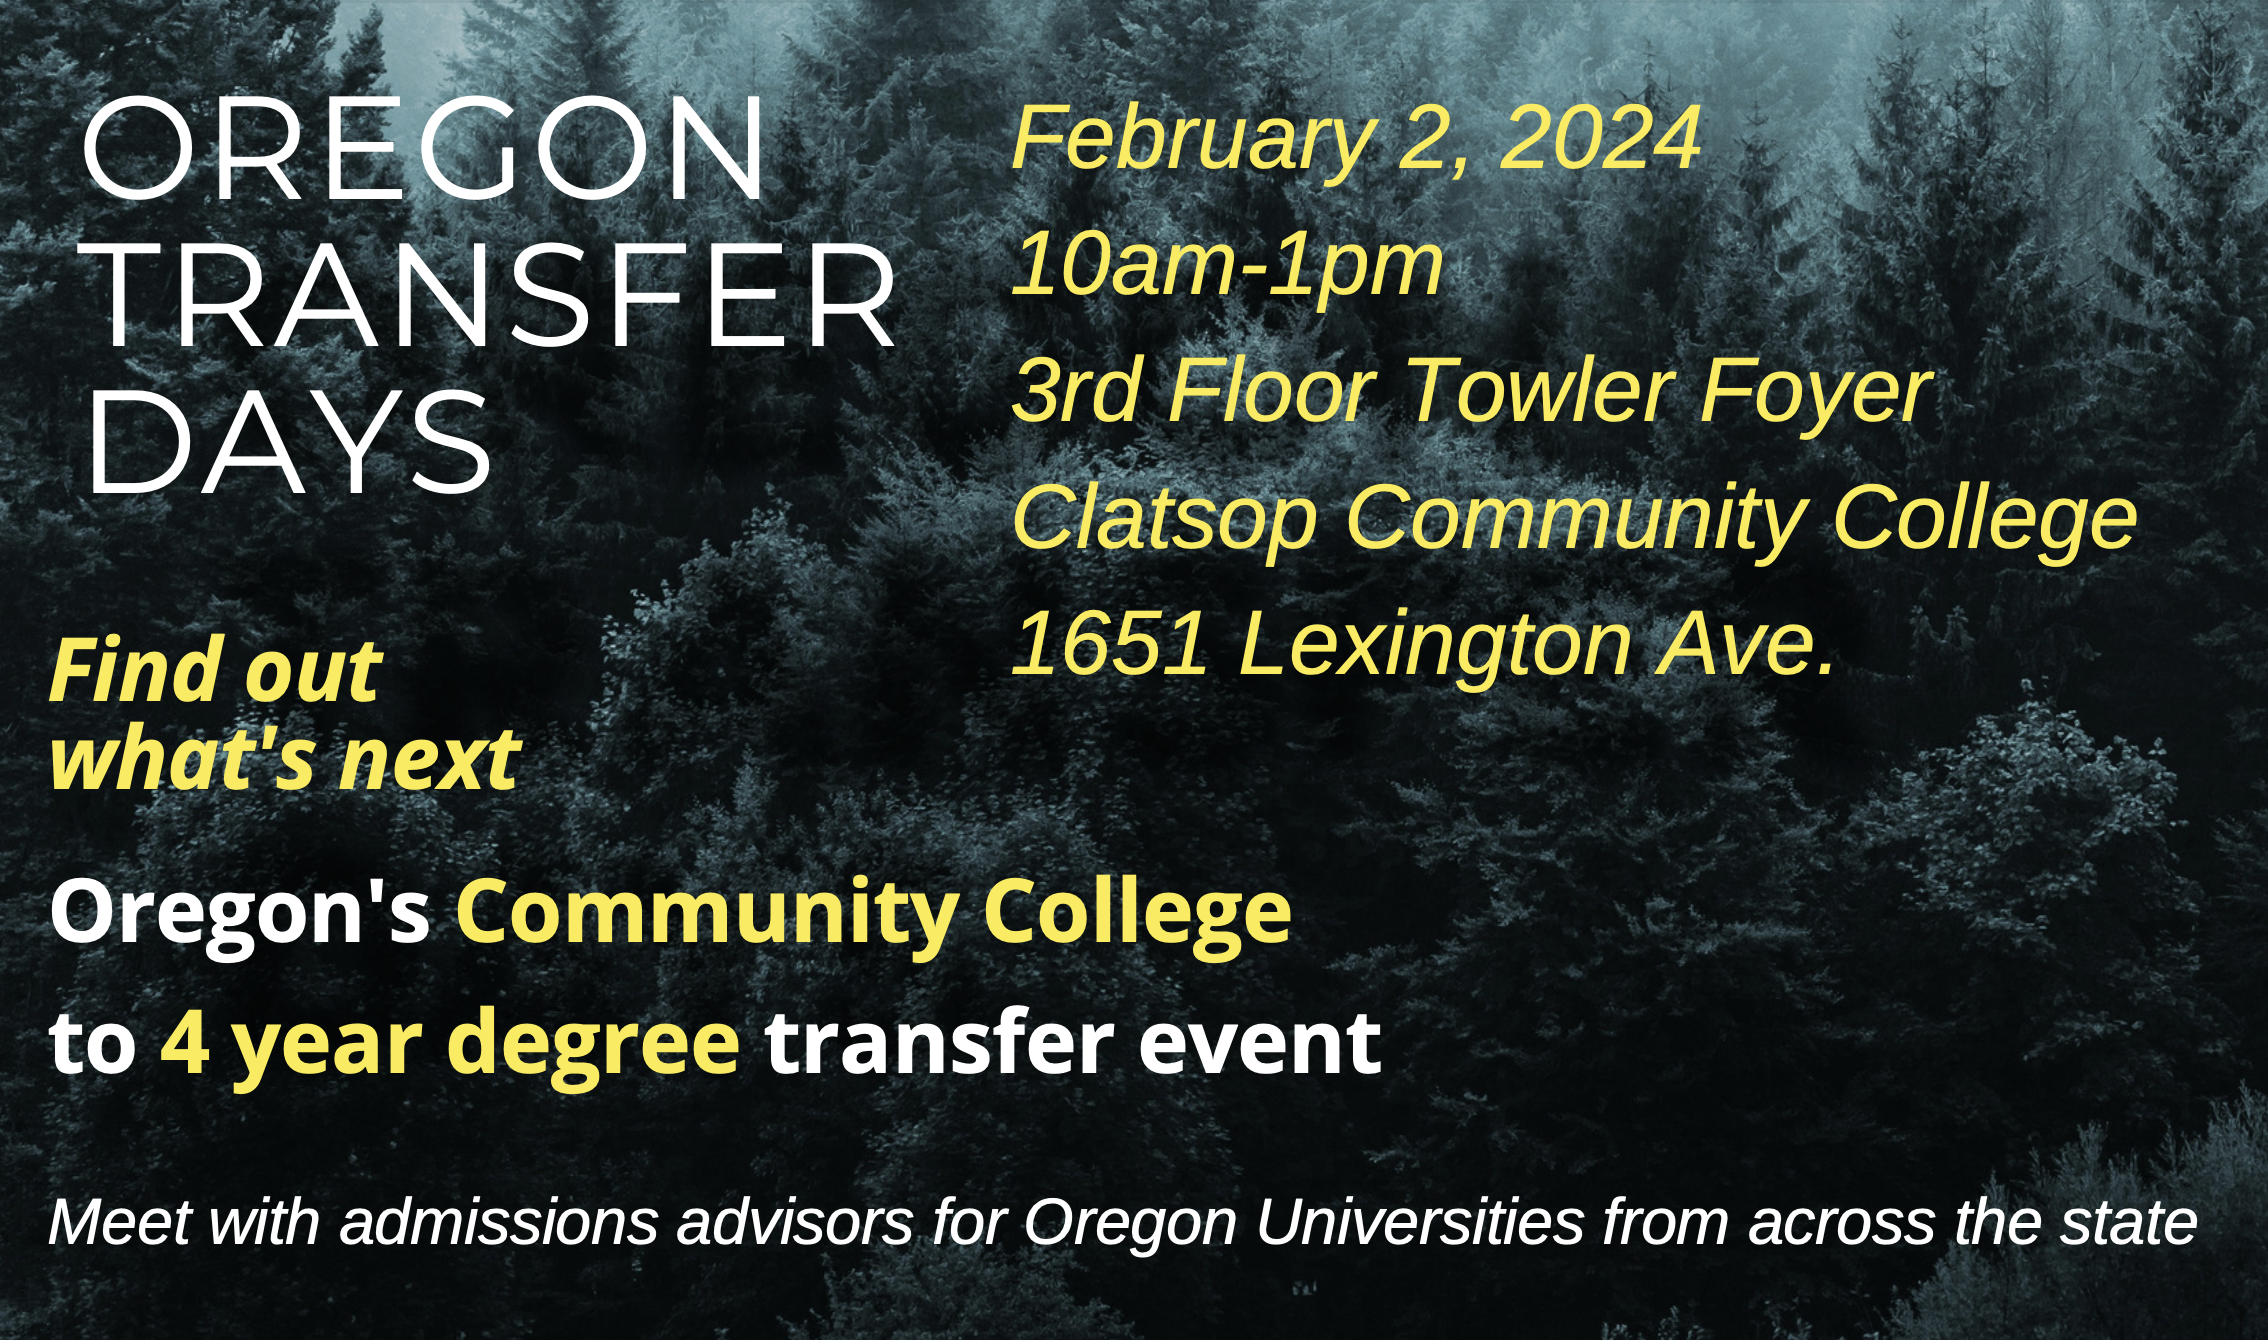 Flyer for Oregon Transfer day on February 2nd